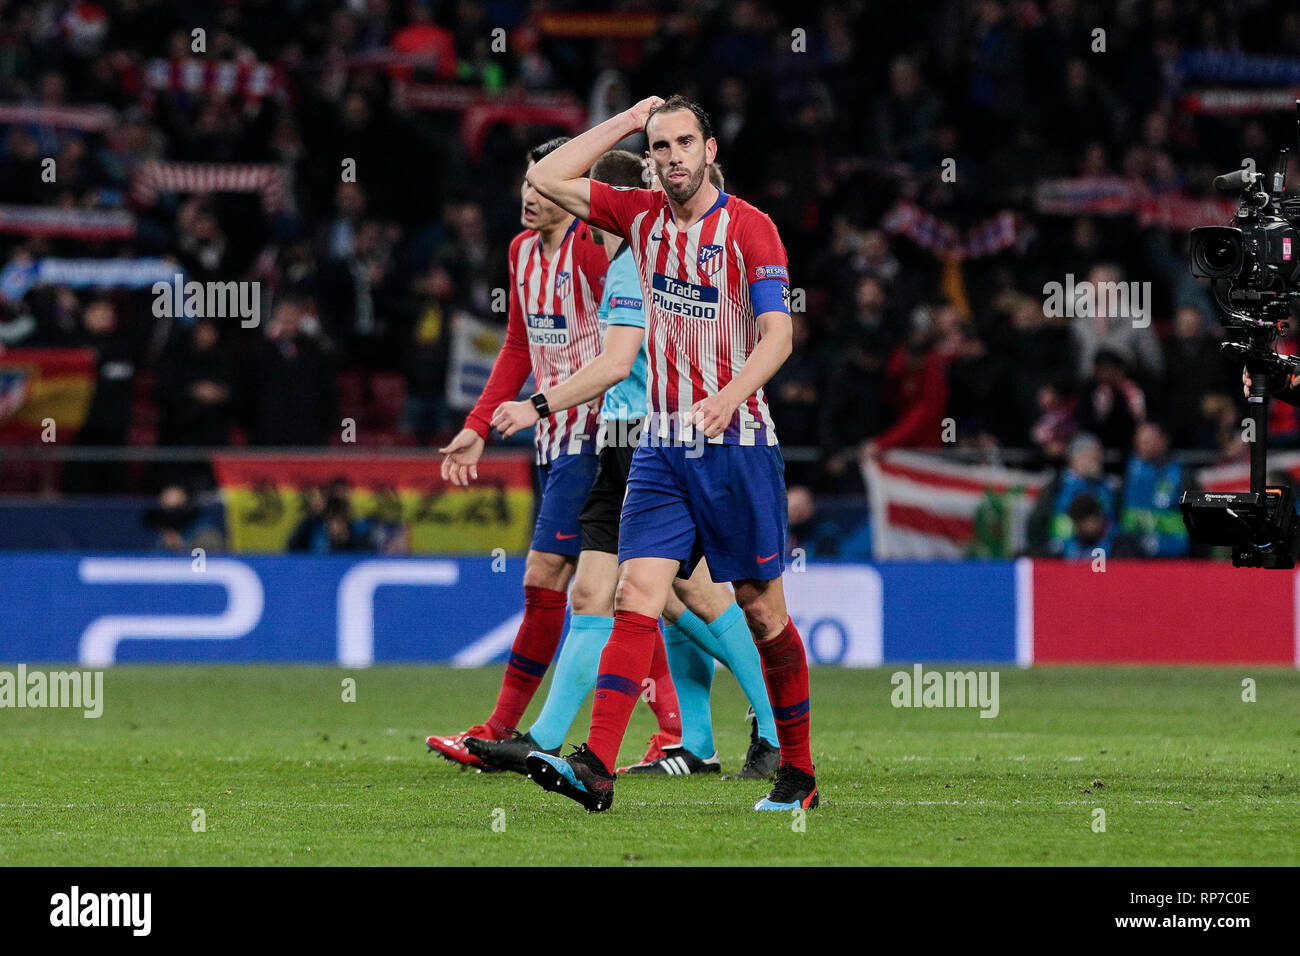 Atletico de Madrid's Diego Godin seen celebrating during the UEFA Champions League match, Round of 16, 1st leg between Atletico de Madrid and Juventus at Wanda Metropolitano Stadium in Madrid, Spain. Stock Photo